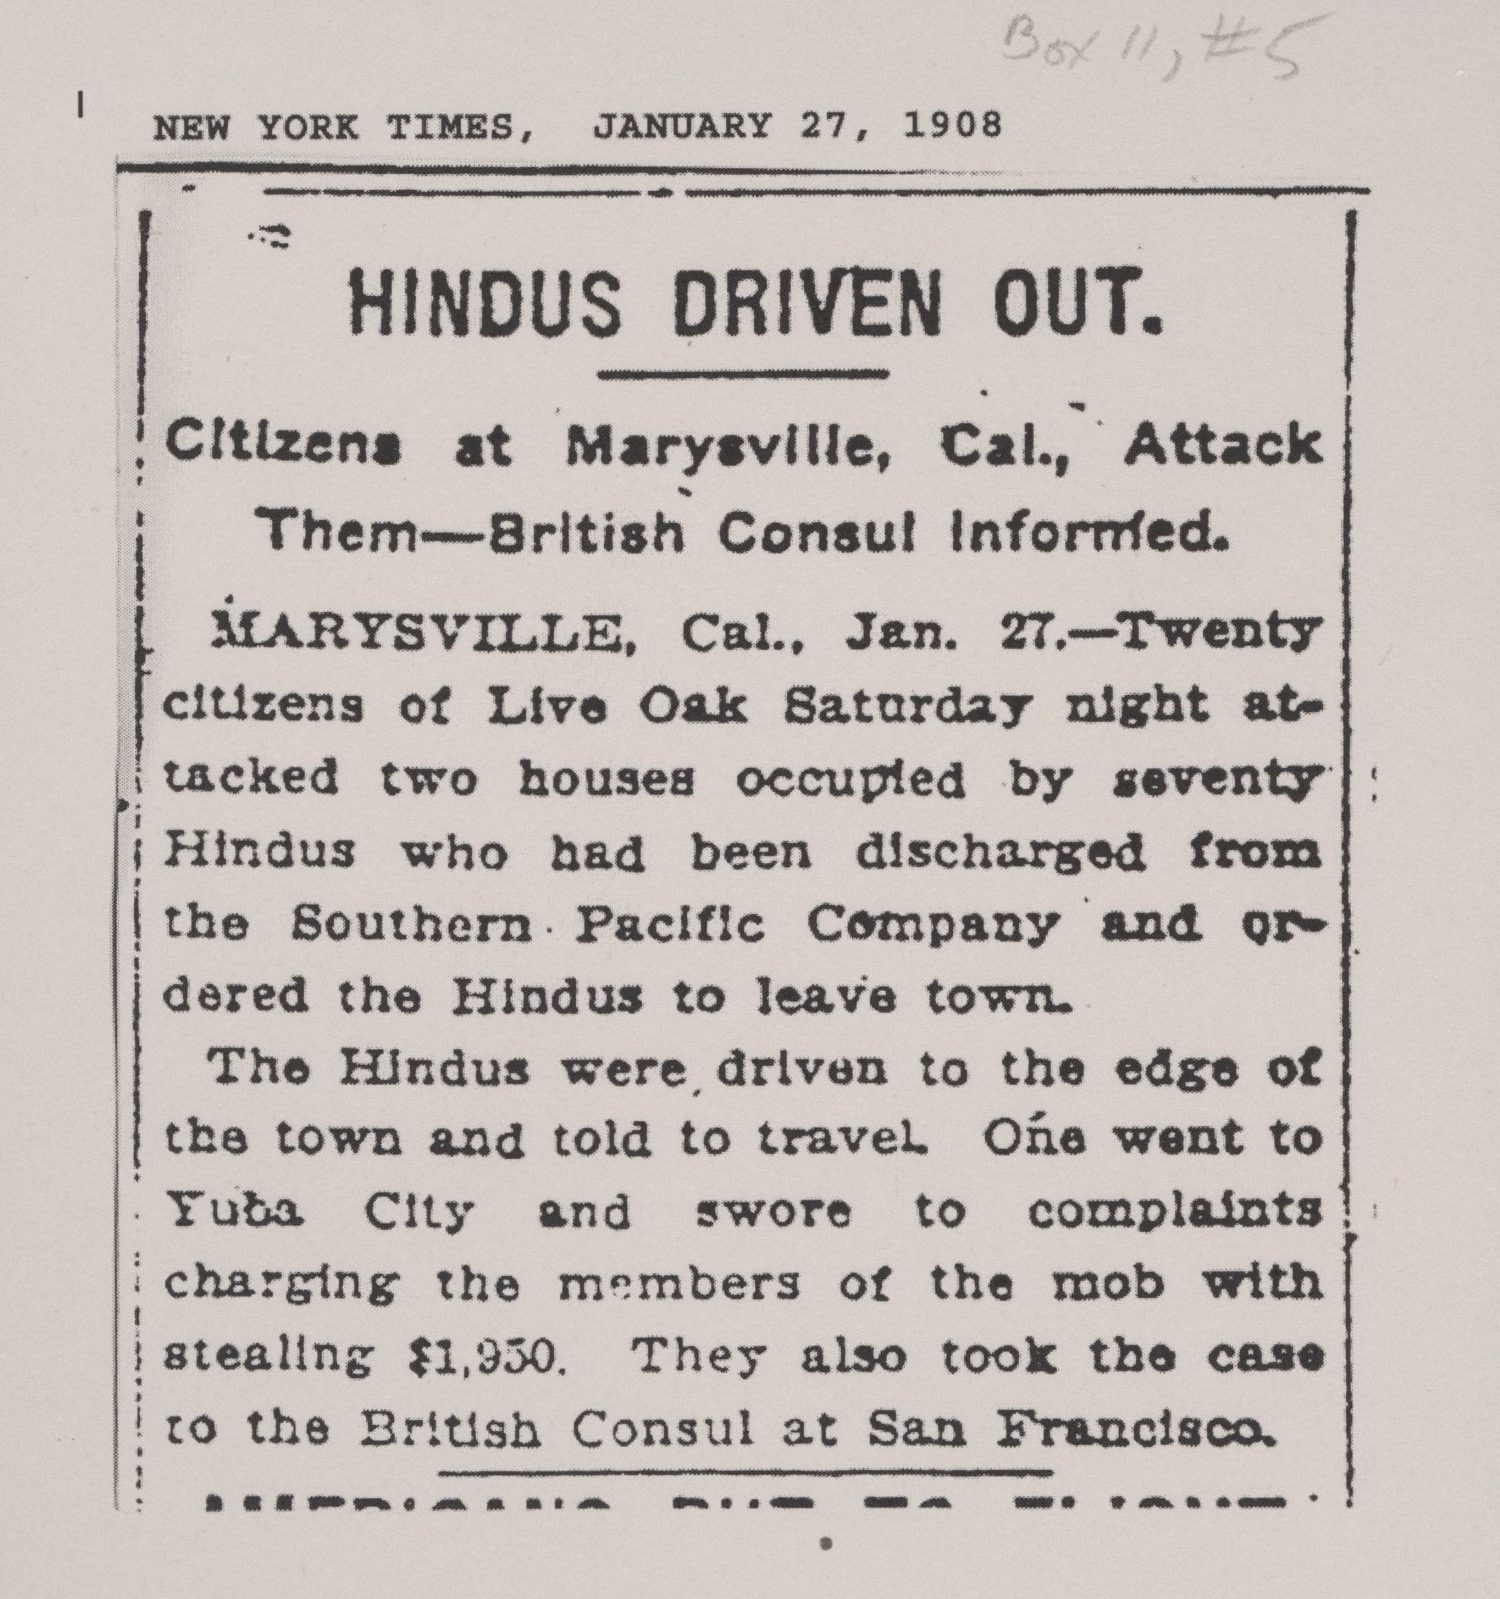 "Hindus Driven Out"